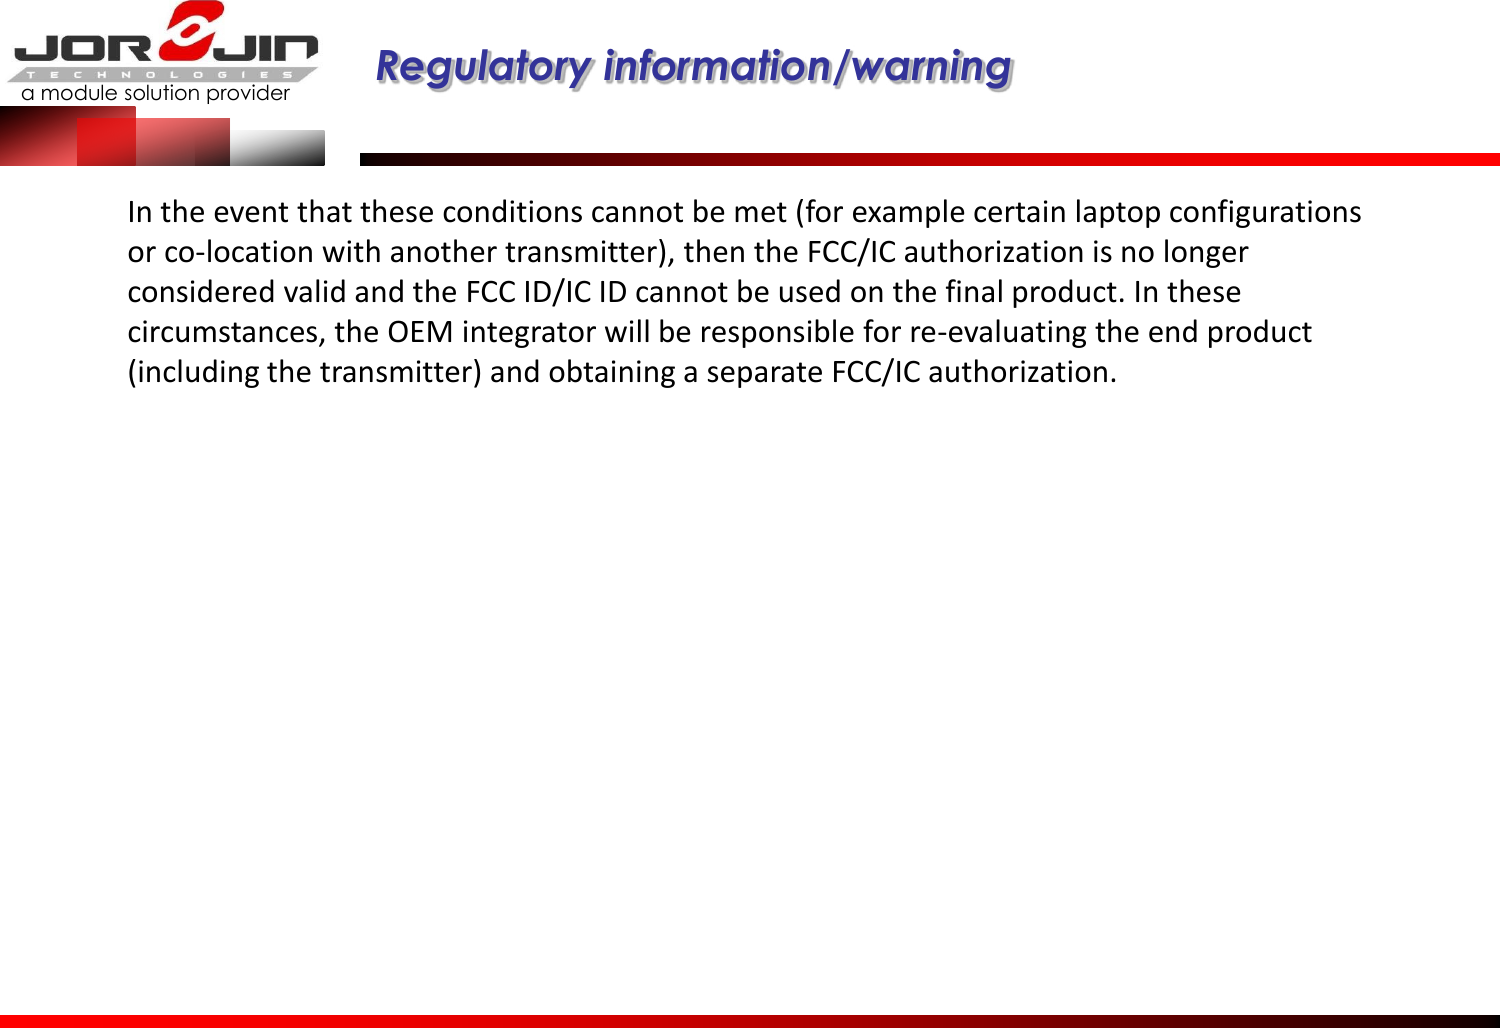 a module solution provider  Regulatory information/warning   In the event that these conditions cannot be met (for example certain laptop configurations or co-location with another transmitter), then the FCC/IC authorization is no longer considered valid and the FCC ID/IC ID cannot be used on the final product. In these circumstances, the OEM integrator will be responsible for re-evaluating the end product (including the transmitter) and obtaining a separate FCC/IC authorization. 